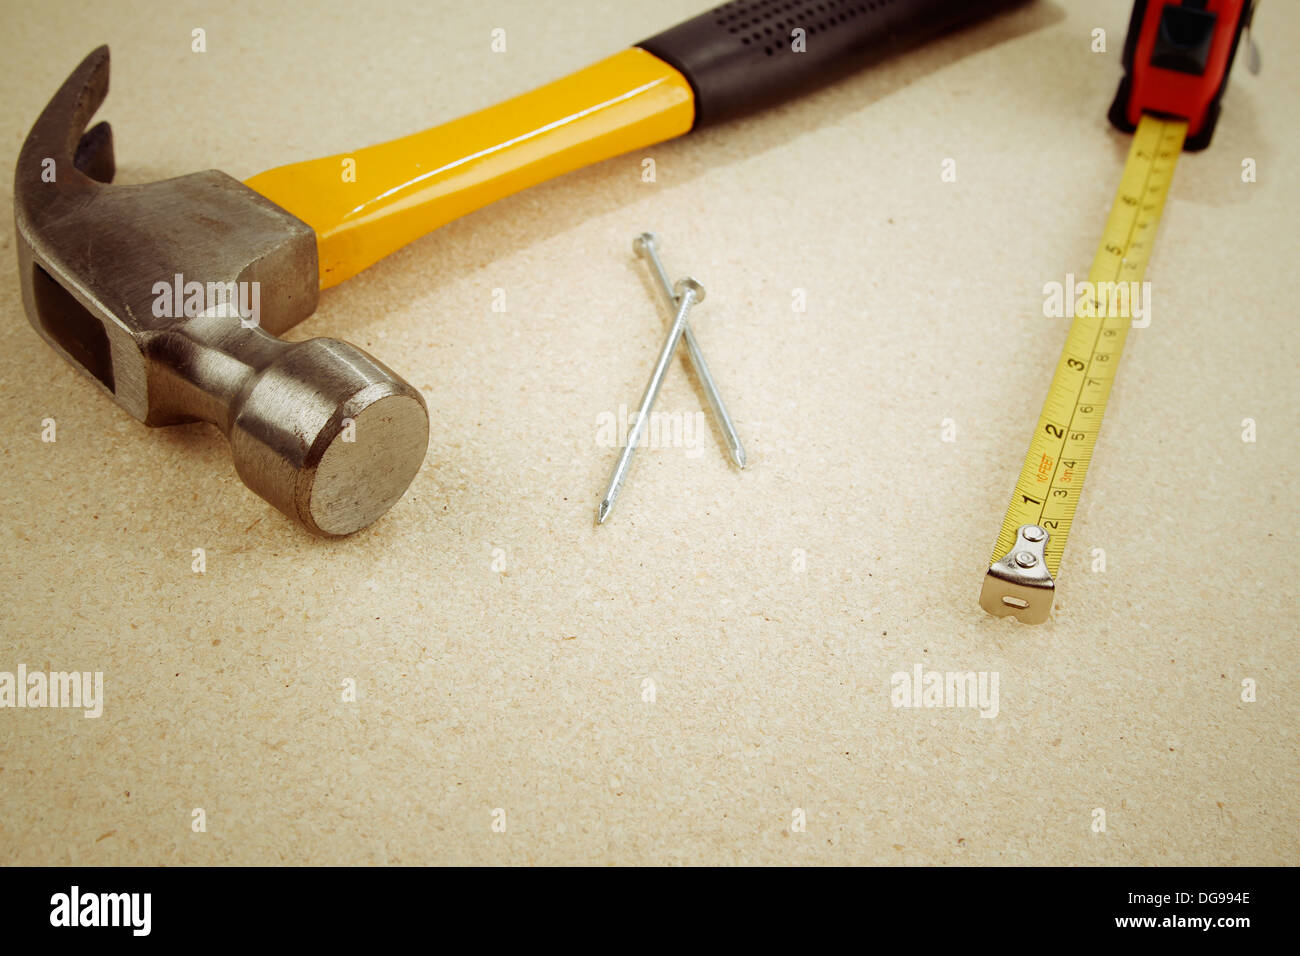 Hammer, nails and tape measure Stock Photo